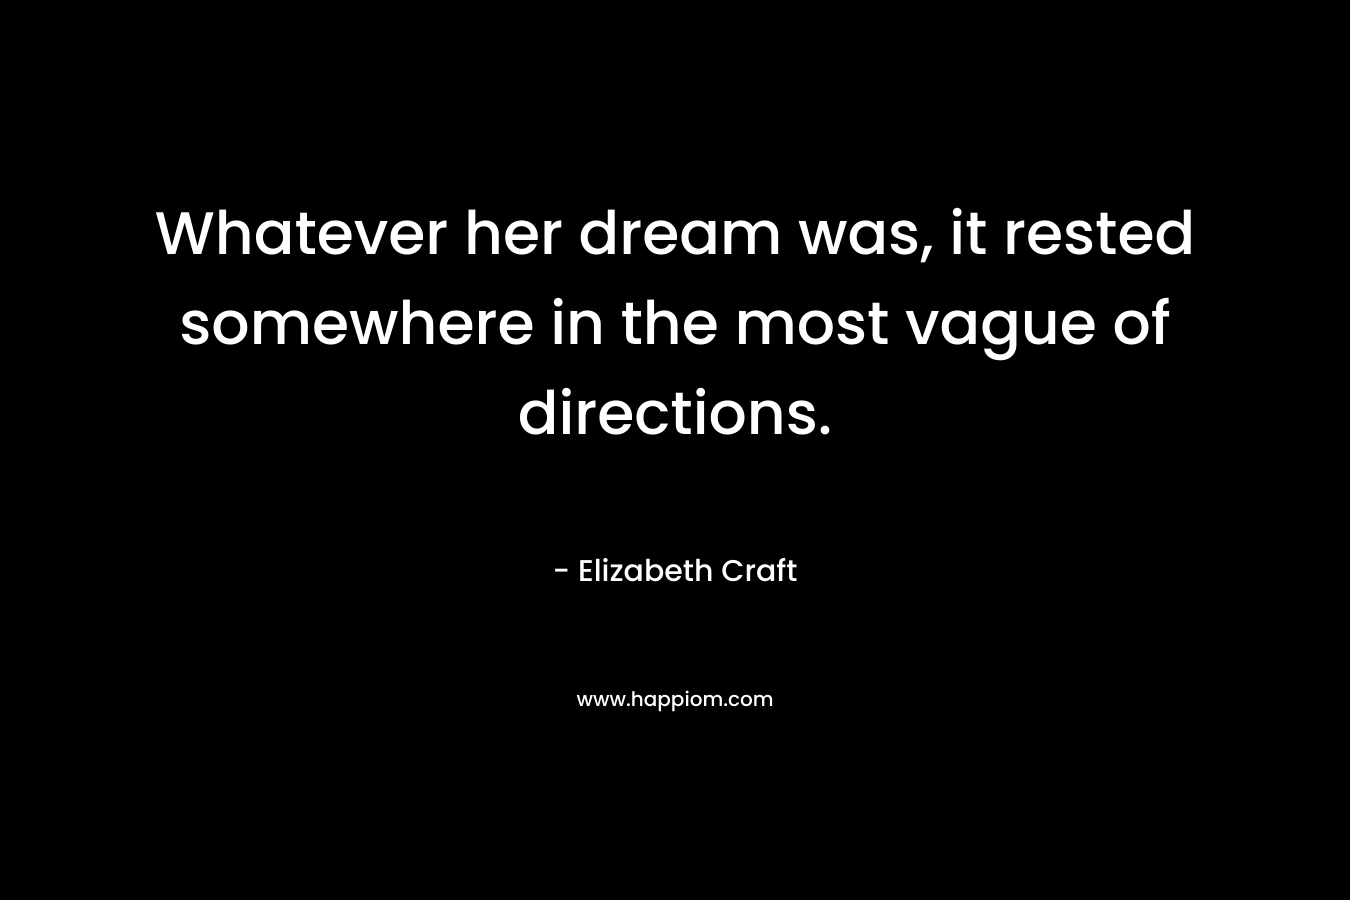 Whatever her dream was, it rested somewhere in the most vague of directions.